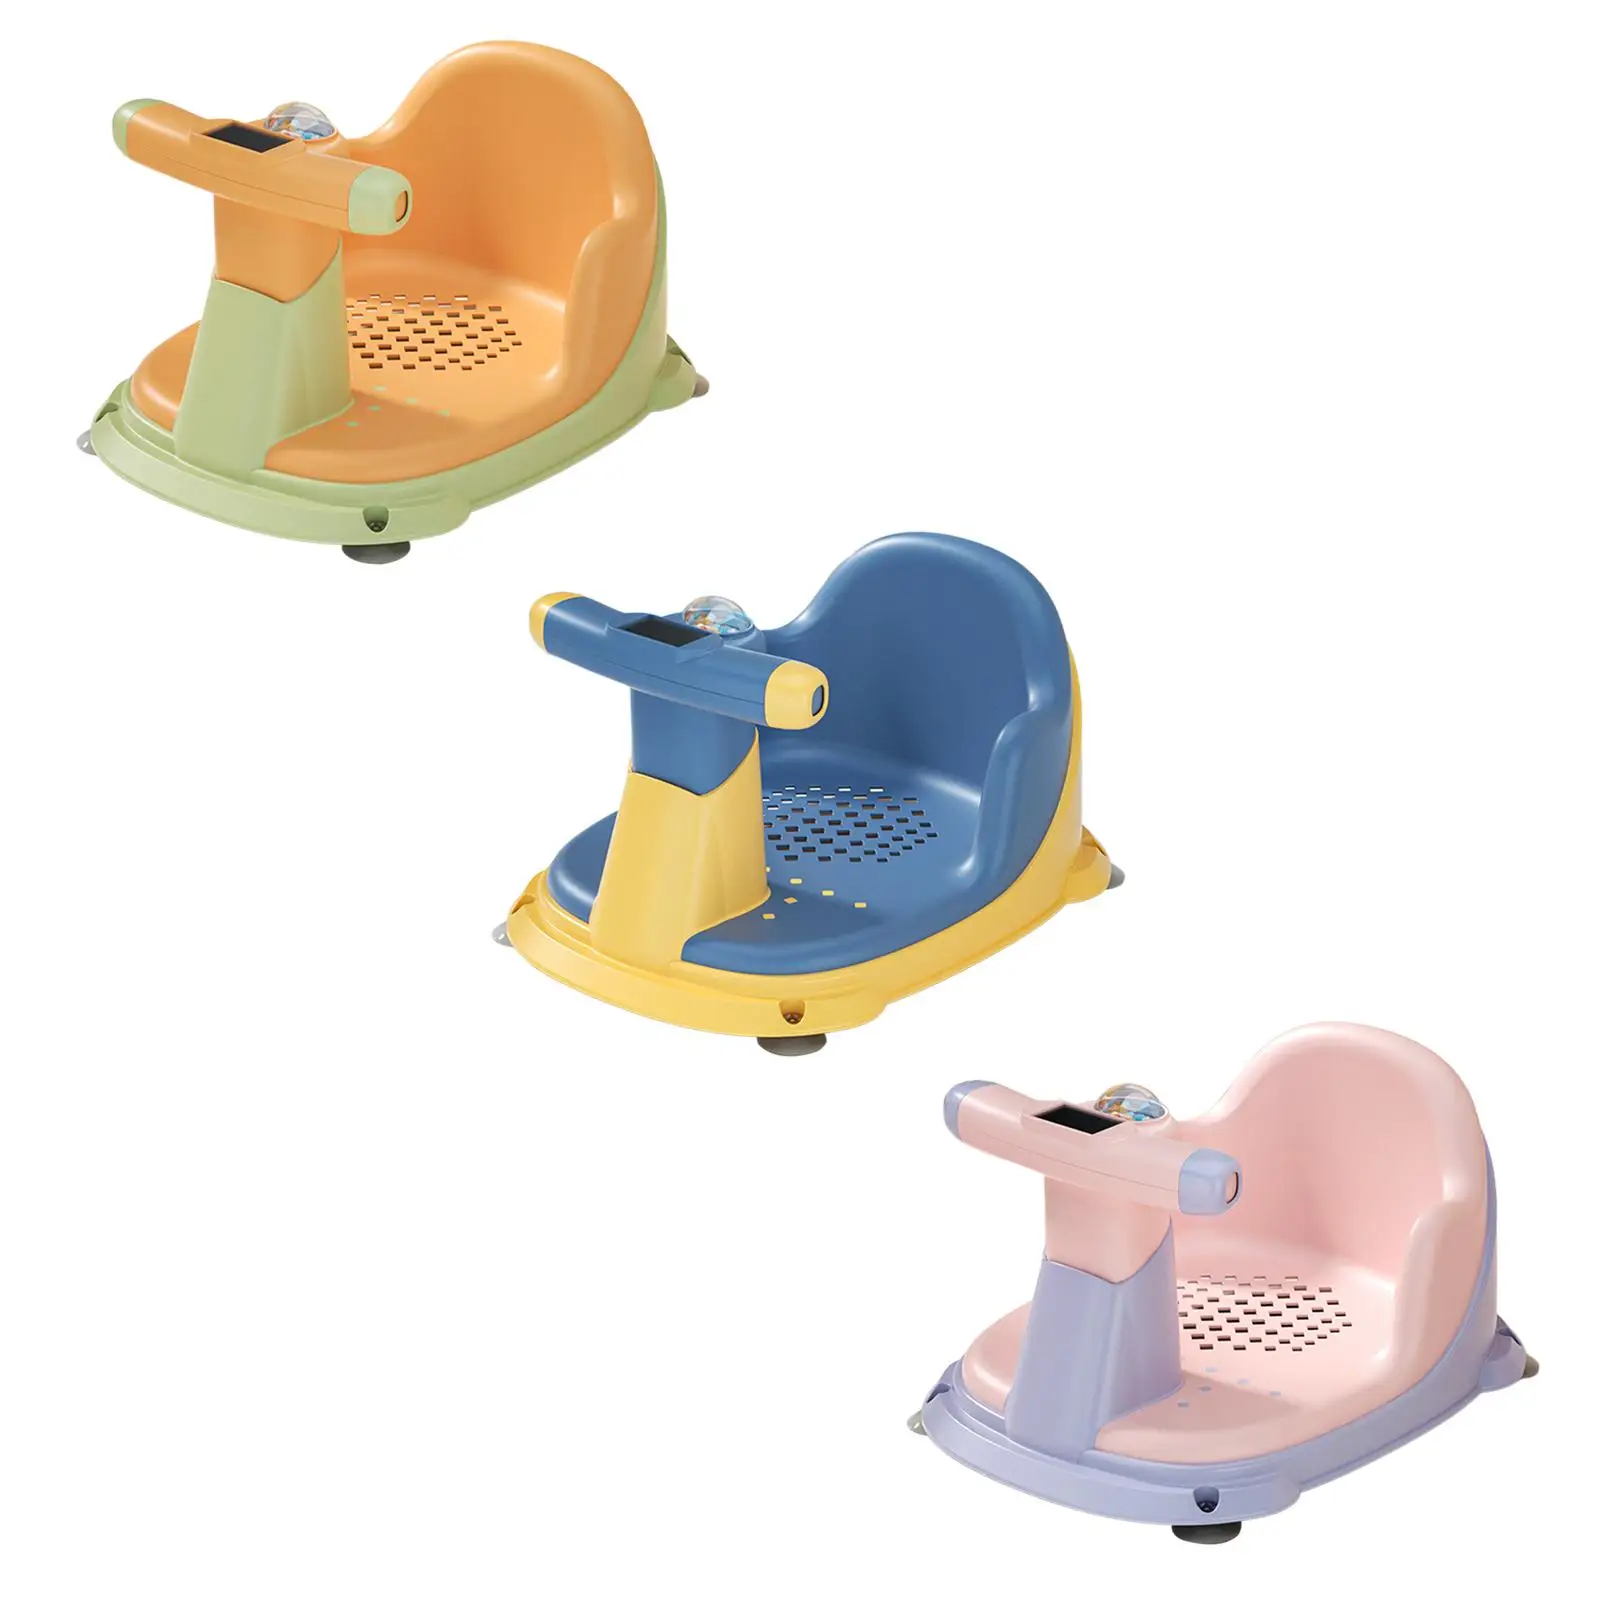 Cute Bathtub Seat Support Tub Sitting up Anti Slip with Suction Cup Chair for Toddlers Baby Newborn Girls Boys Bathroom